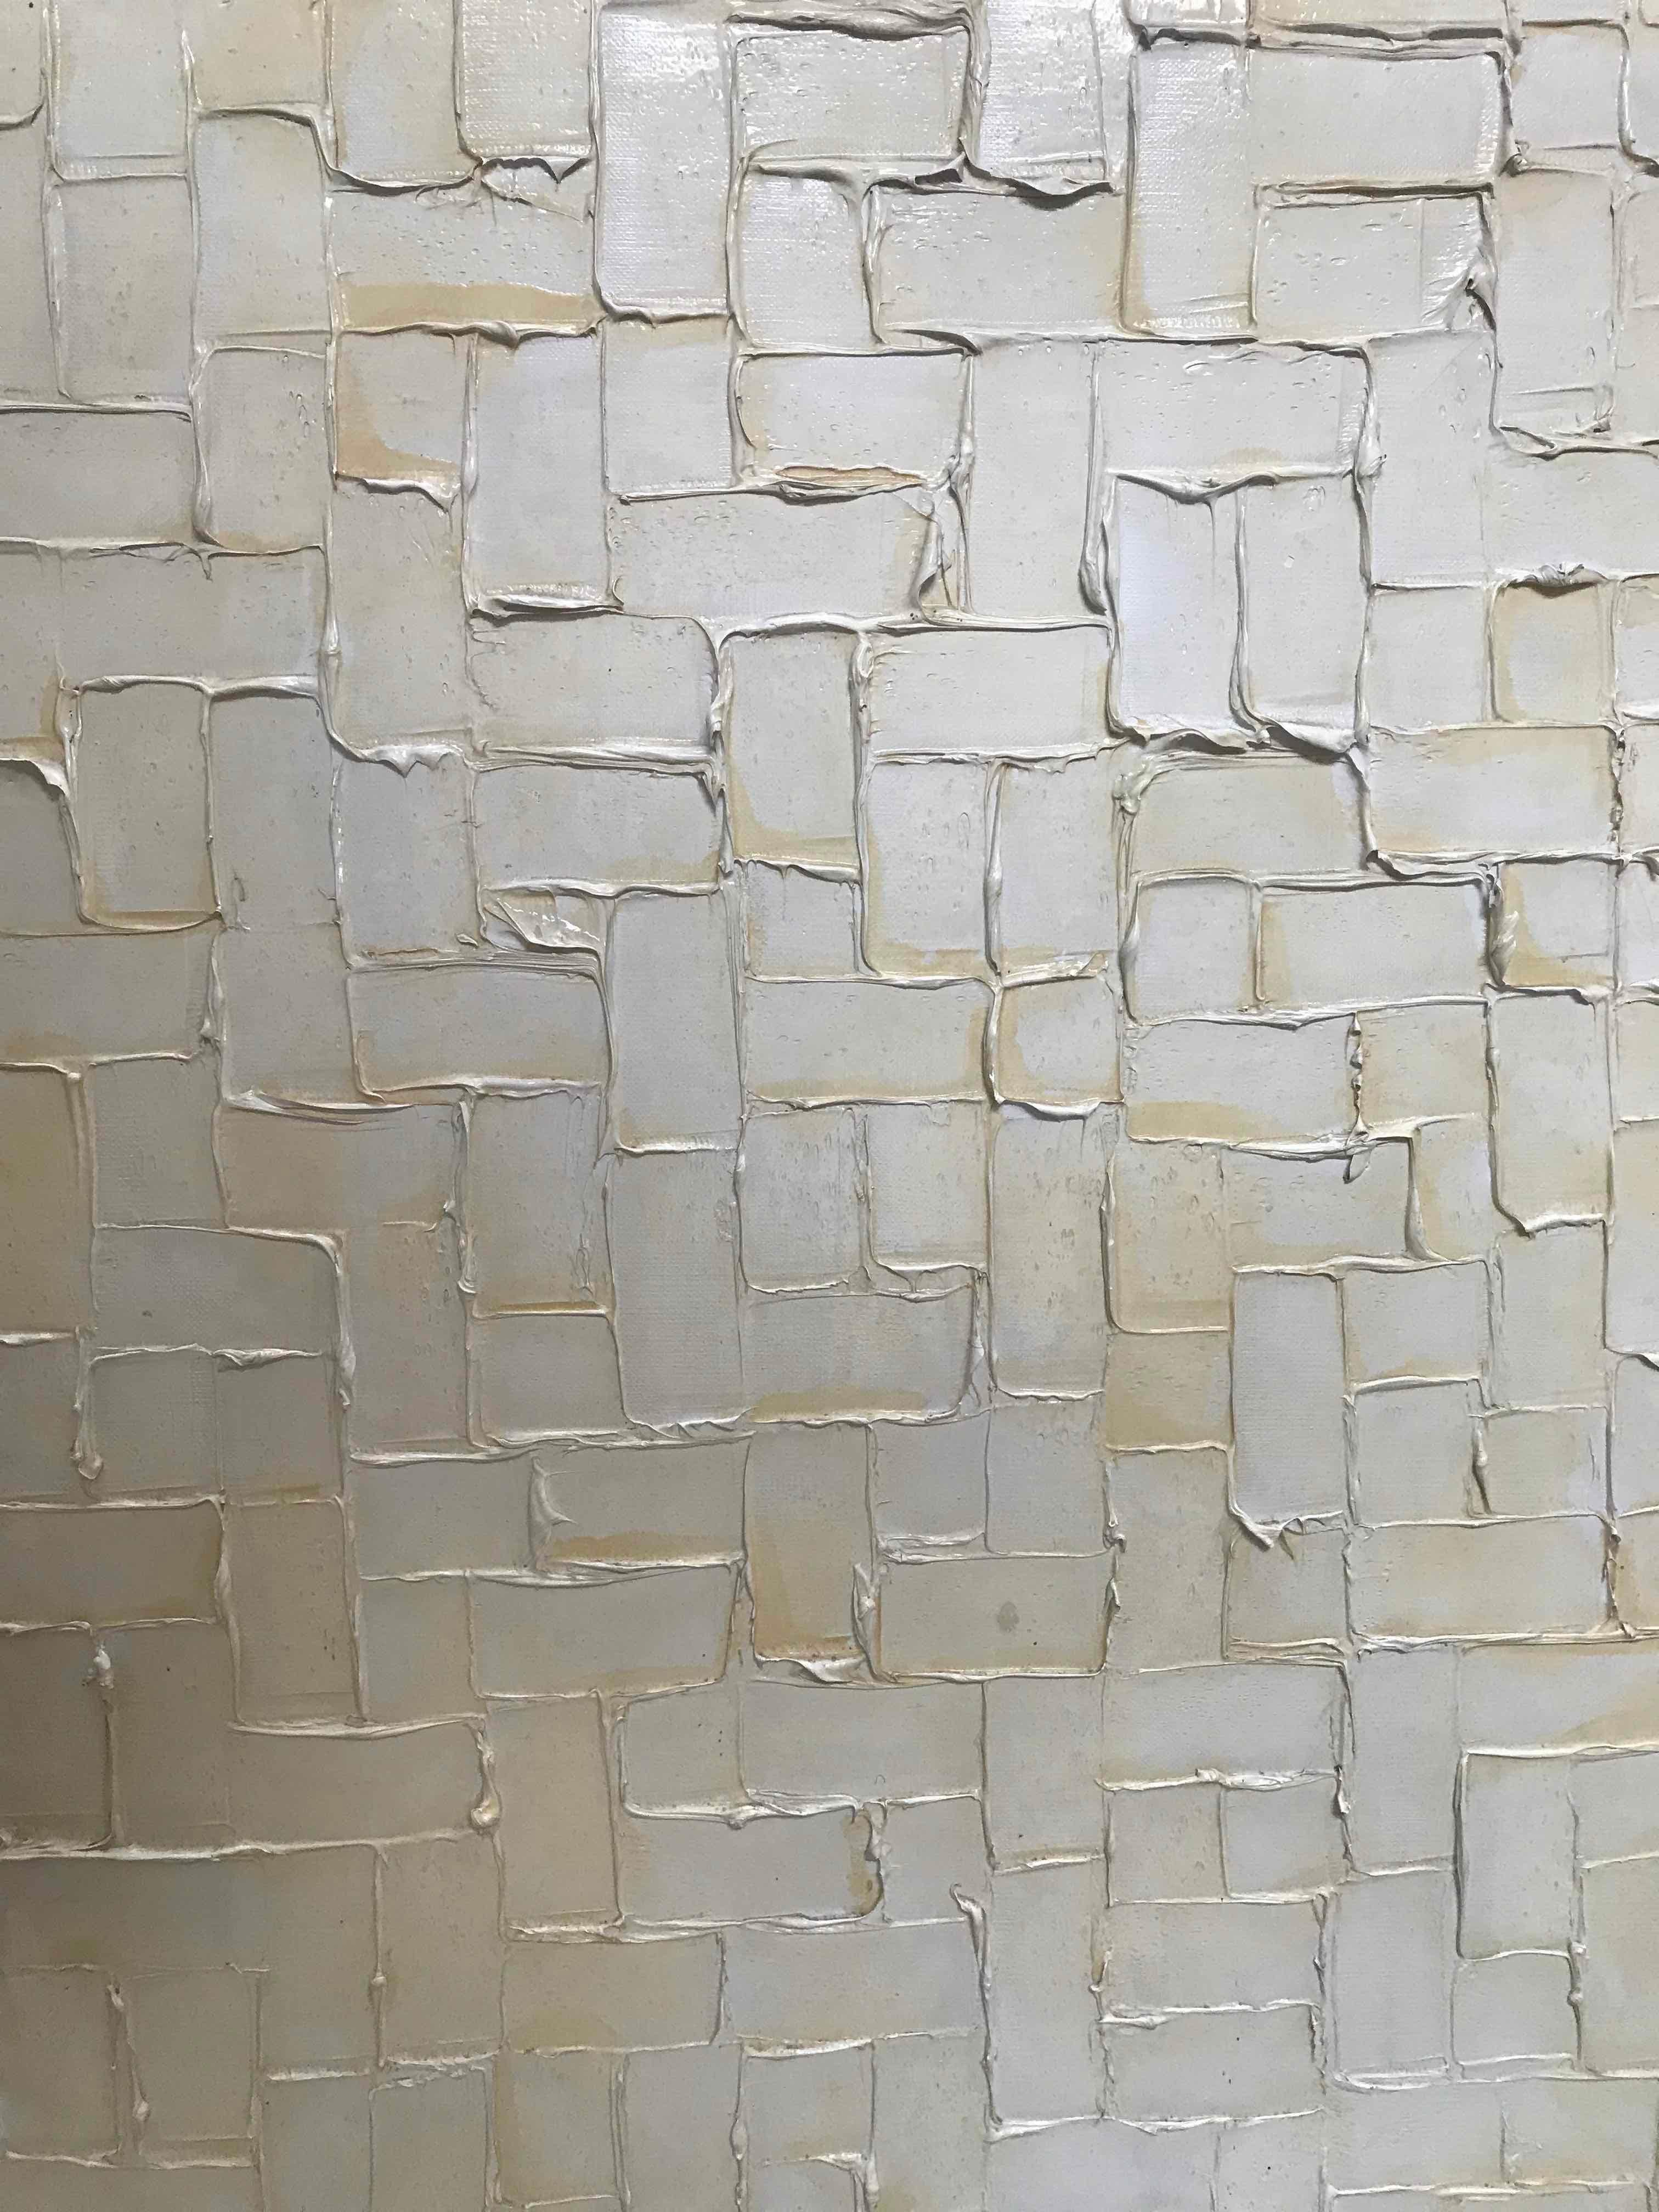 A textured geometric painting.